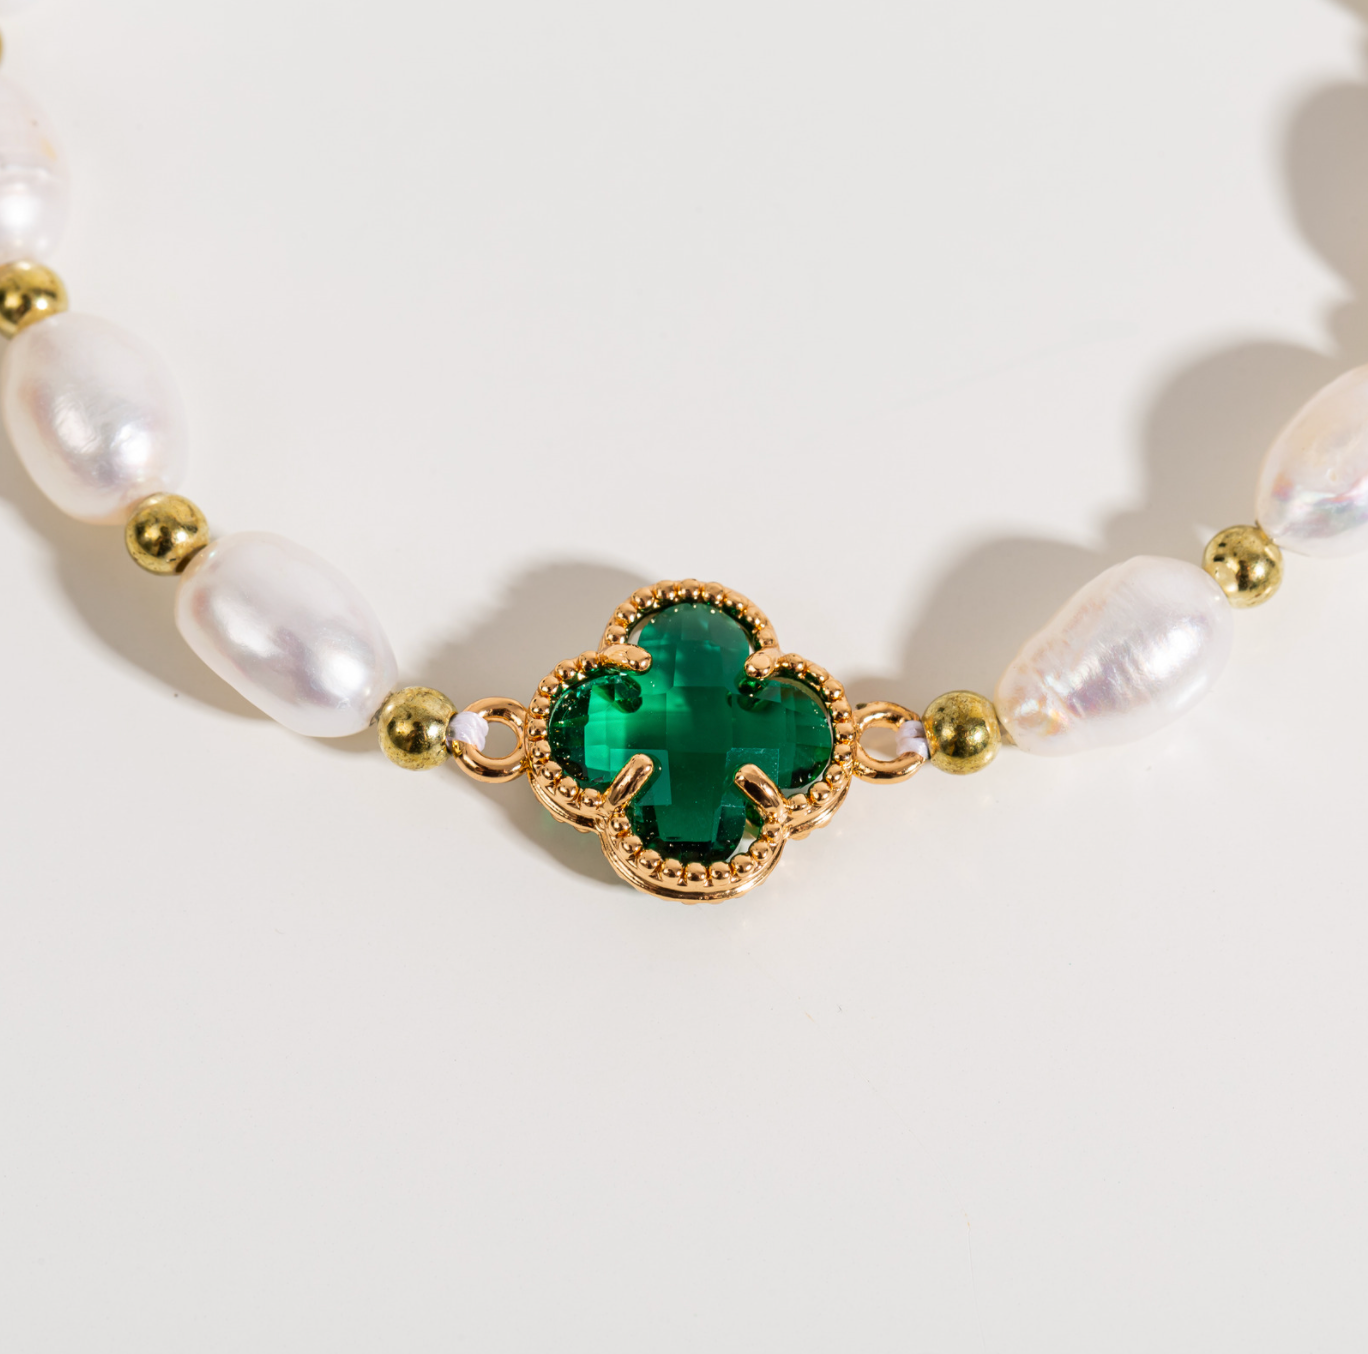 Emerald Cloverleaf Bracelet with Emerald and Pearls in Gold